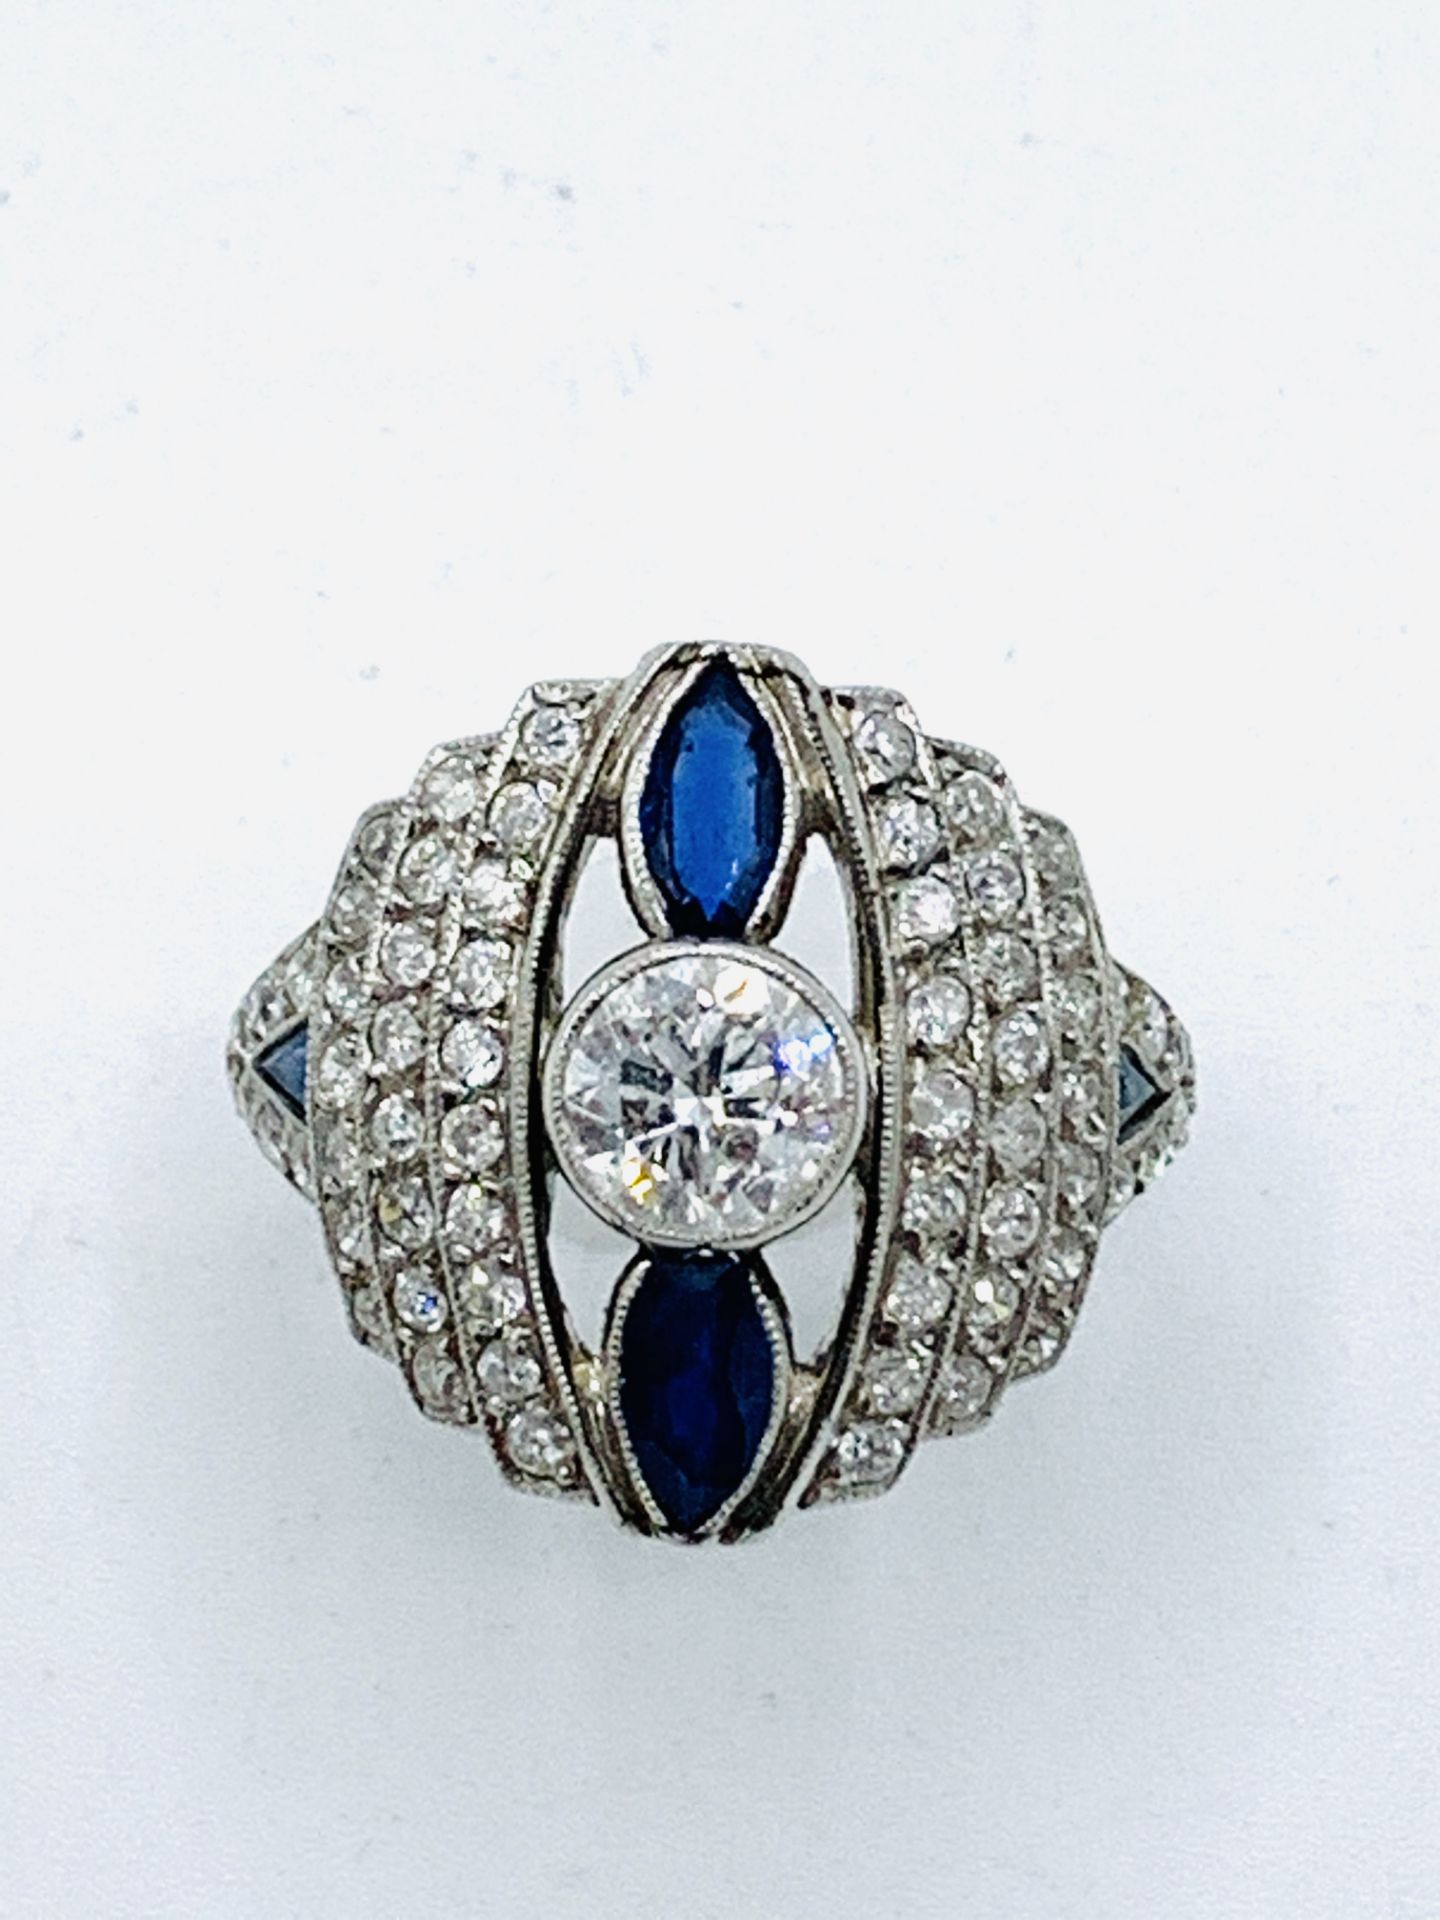 Art Deco white gold diamond and sapphire ring. Size O 1/2 Wt. 7.8gms. Size of centre diamond 6.3m - Image 2 of 7